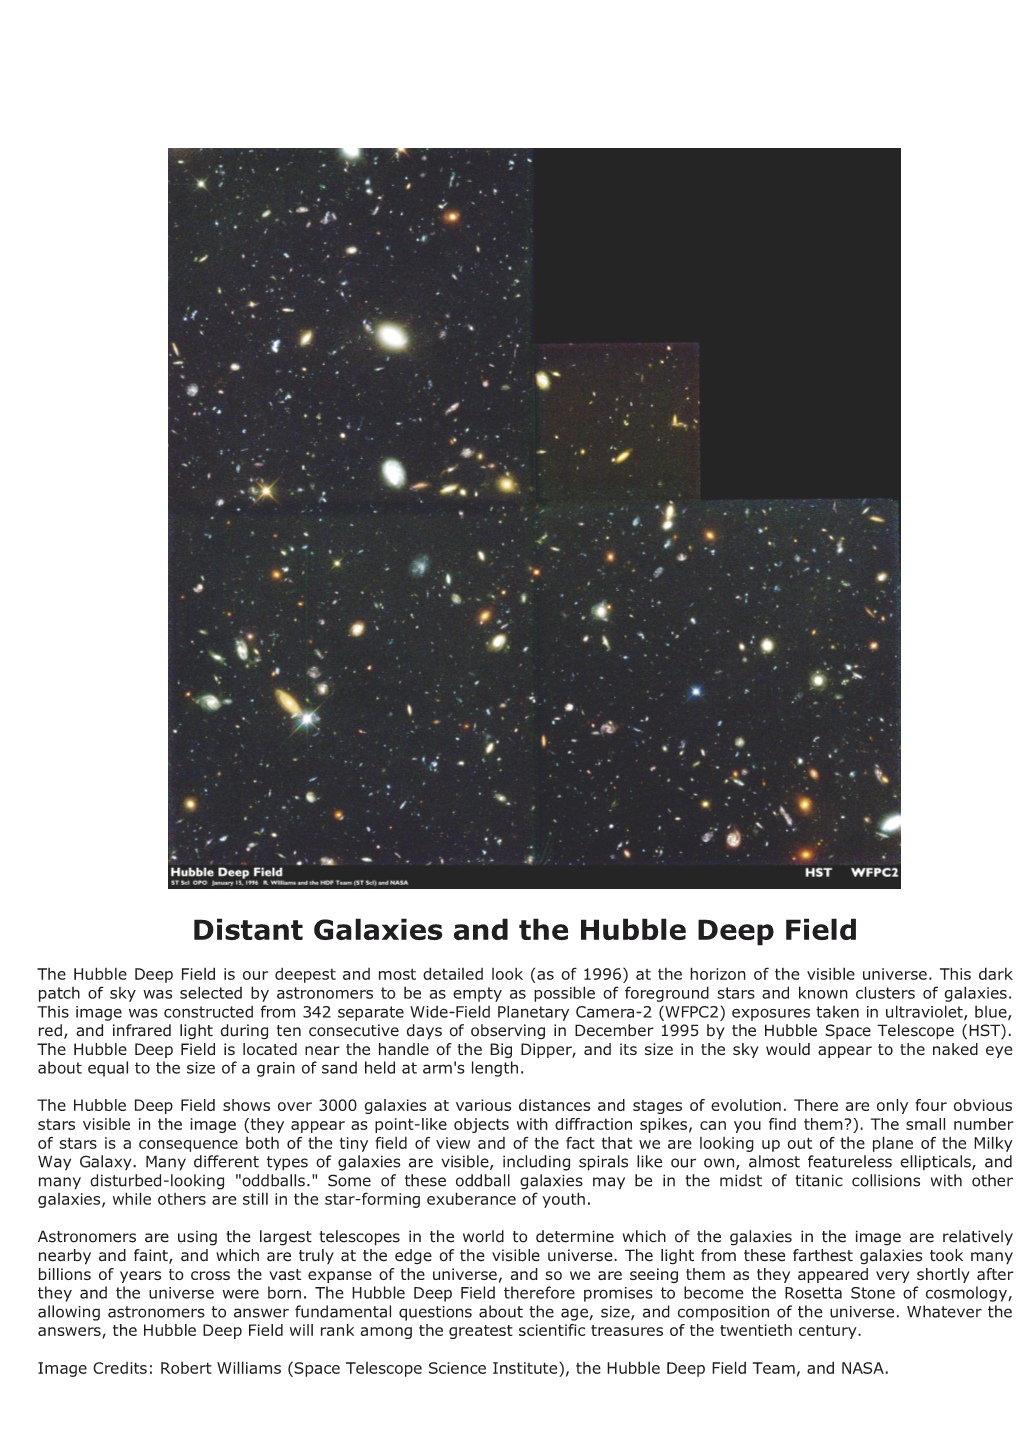 Distant Galaxies and the Hubble Deep Field